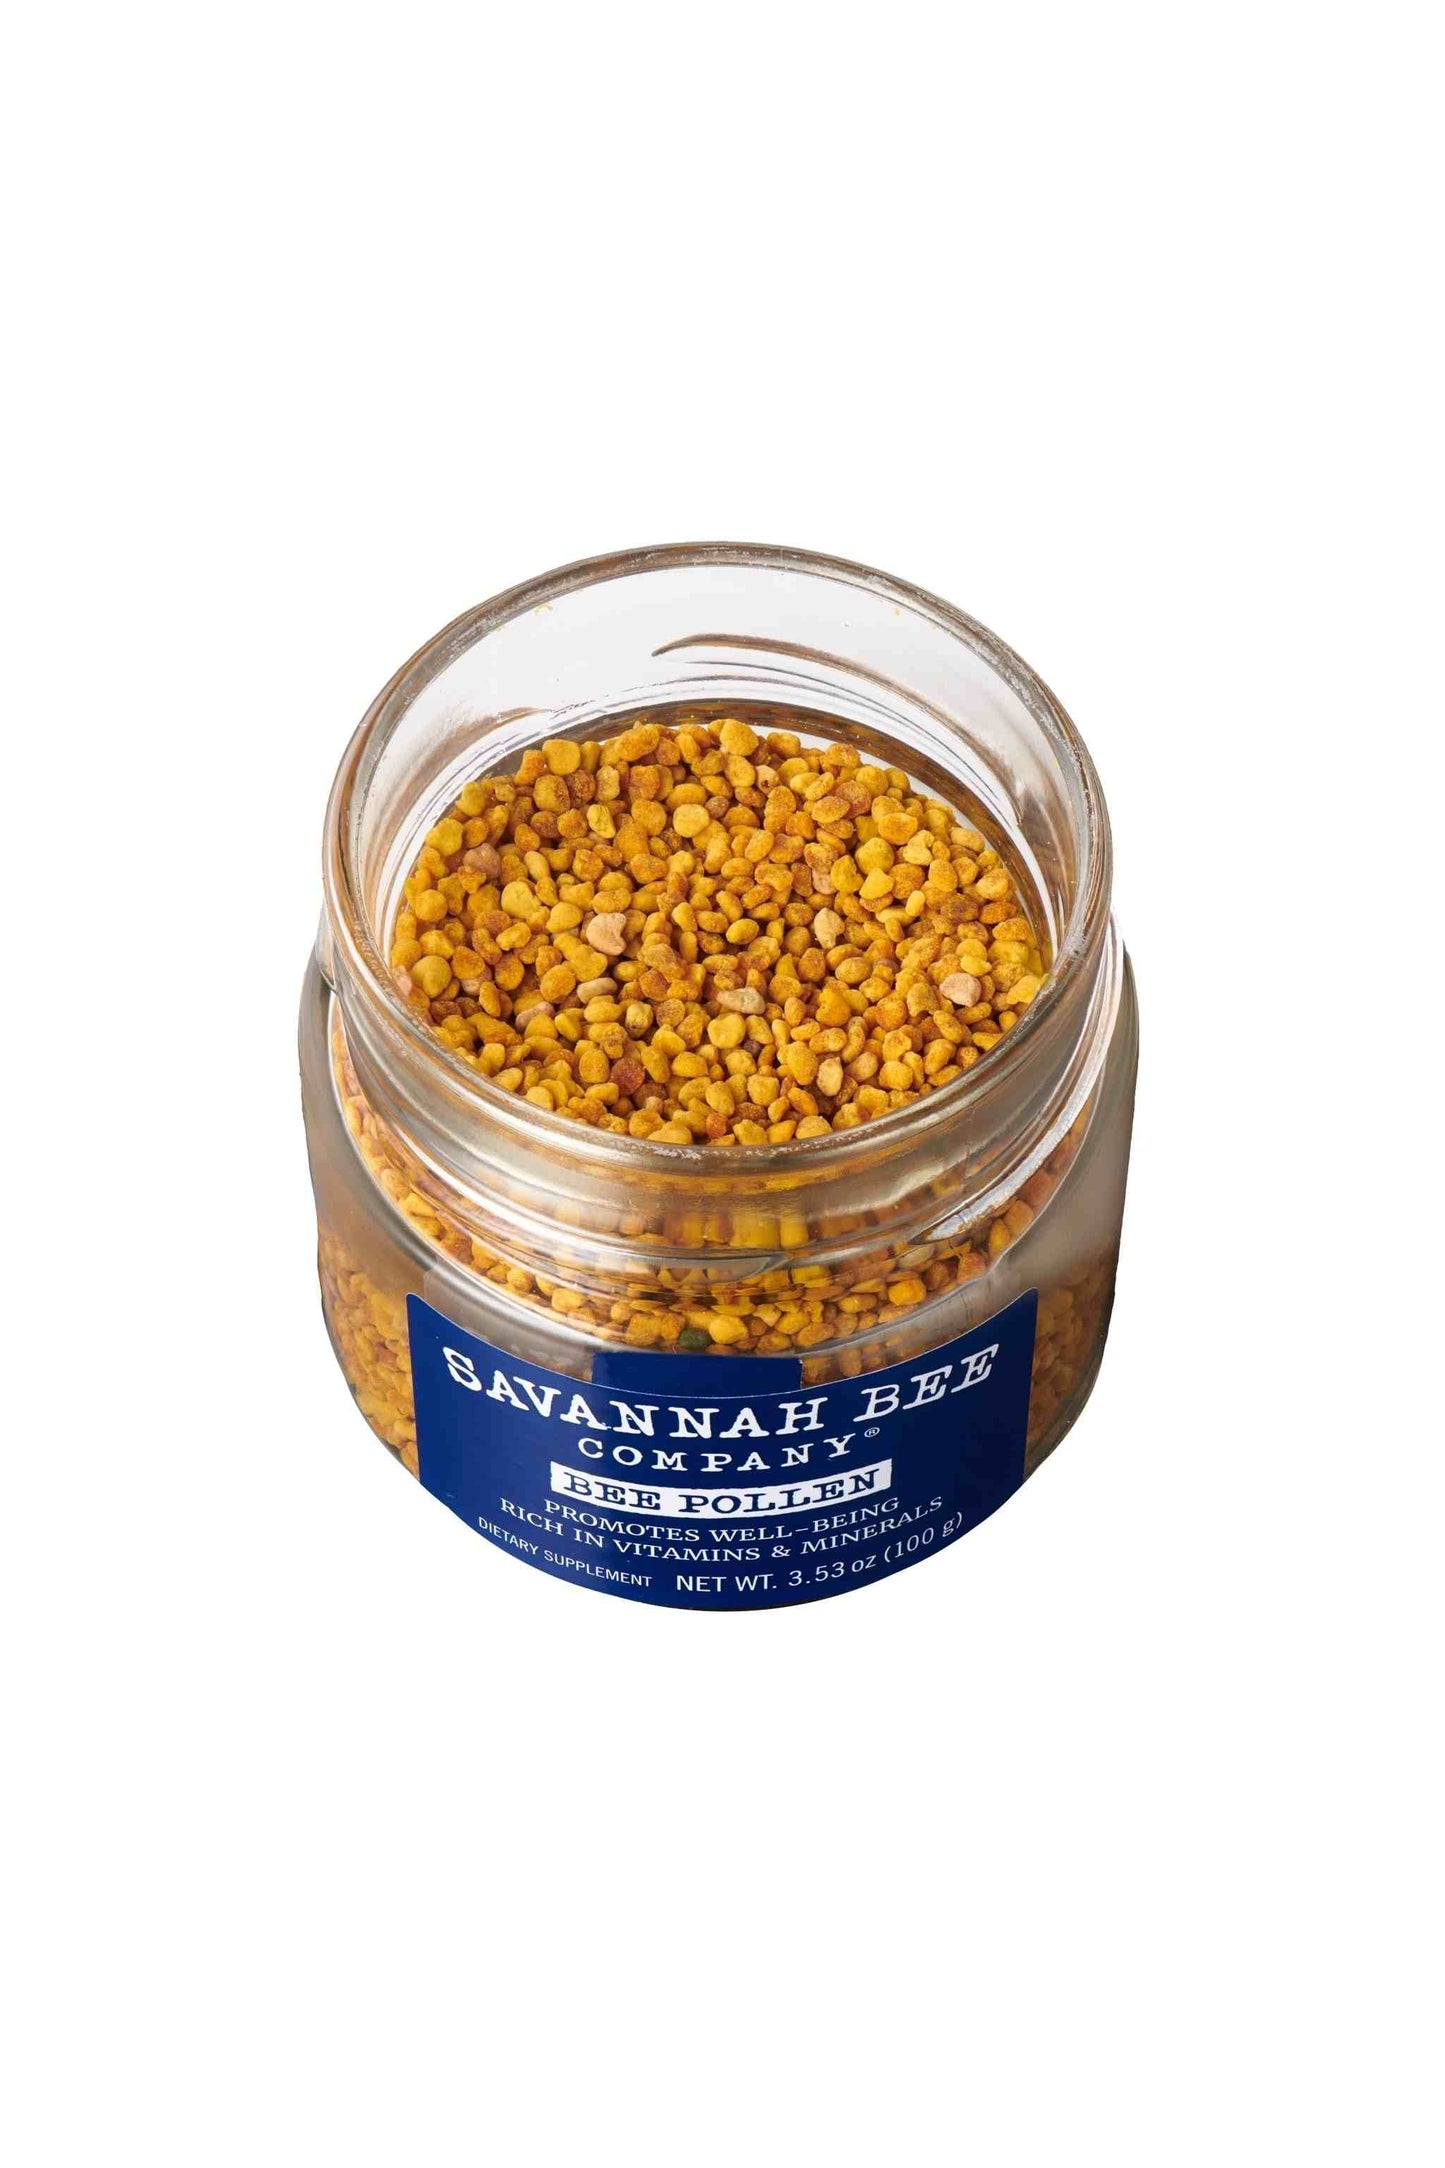 Pure & Natural Savannah Bee Company Bee Pollen 3.53. oz. Lid unscrewed with a ariel shot of bee pollen.